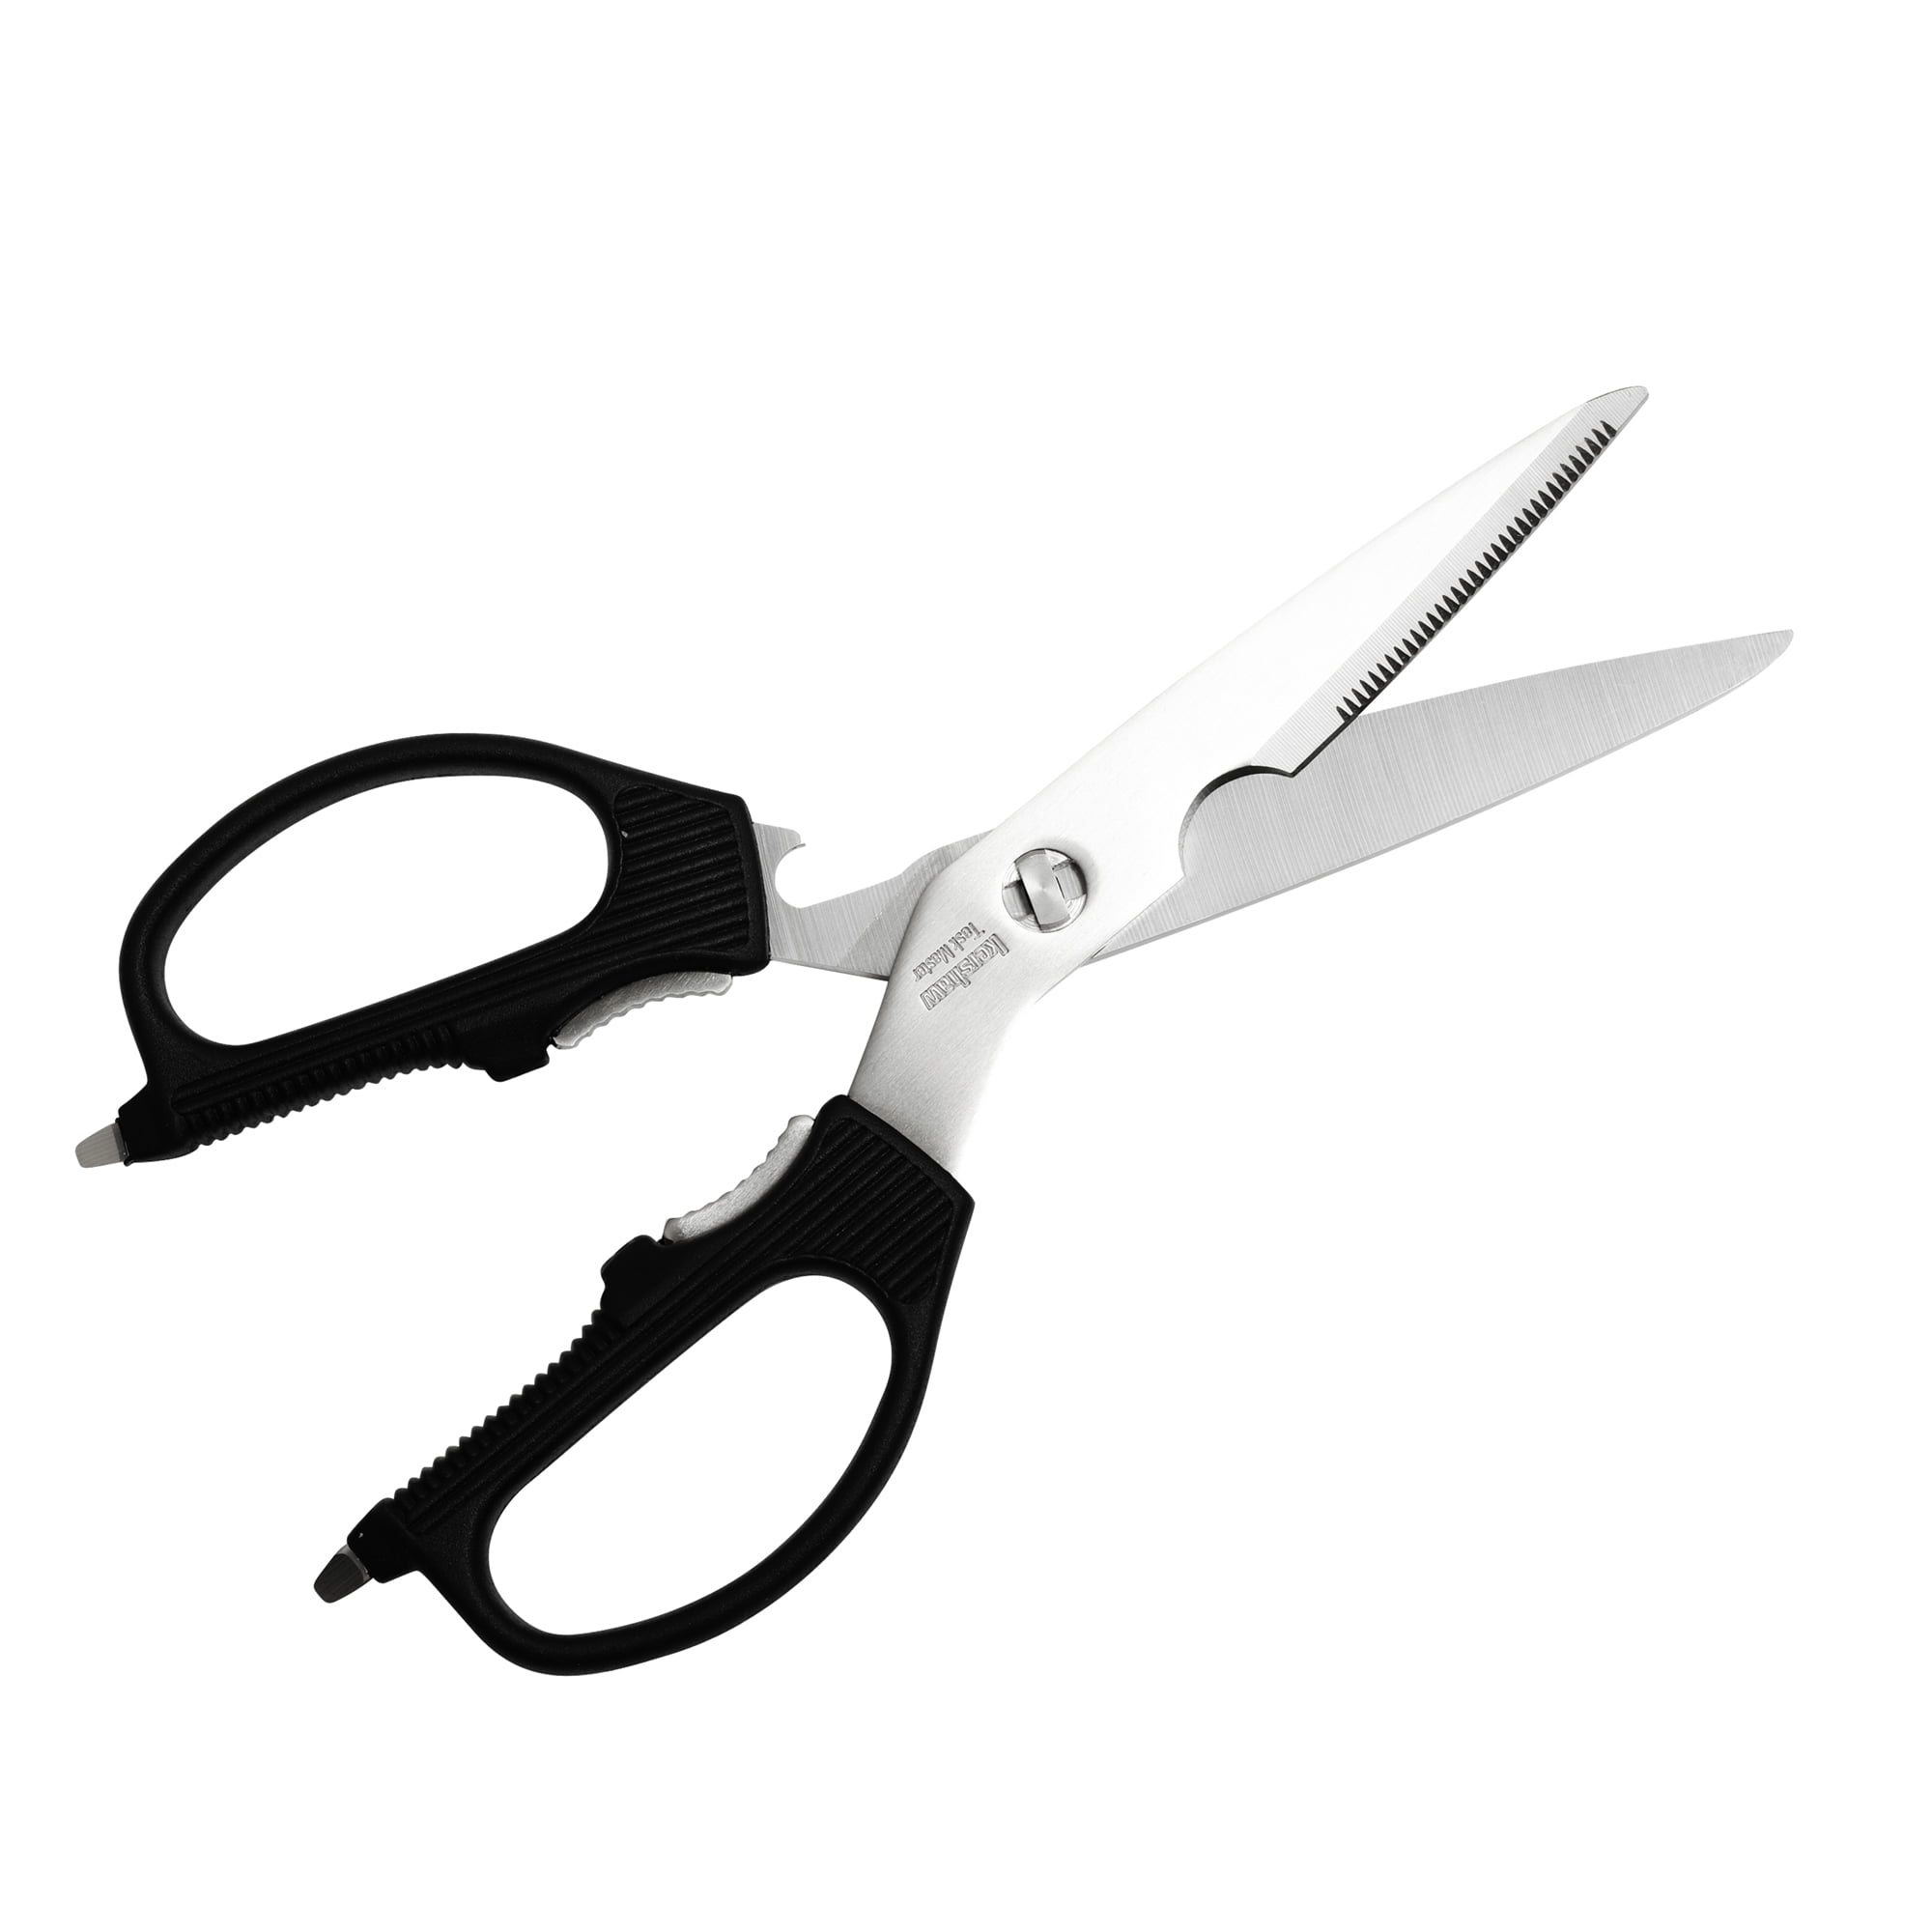 Kershaw Taskmaster Multi-Function Kitchen Shears with Magnetic